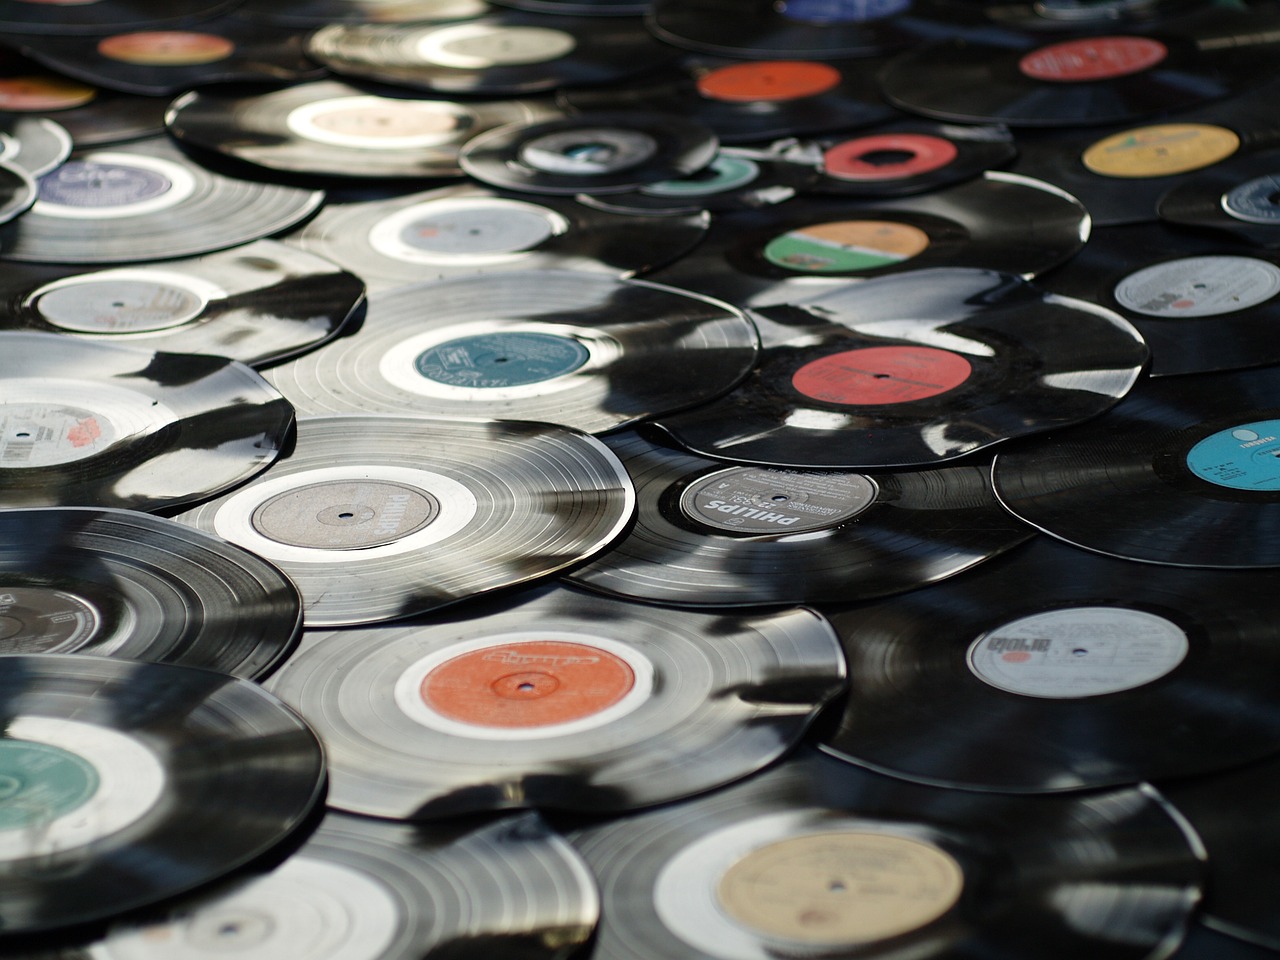 Can I Play 78 RPM Records On A Turntable Record Player?